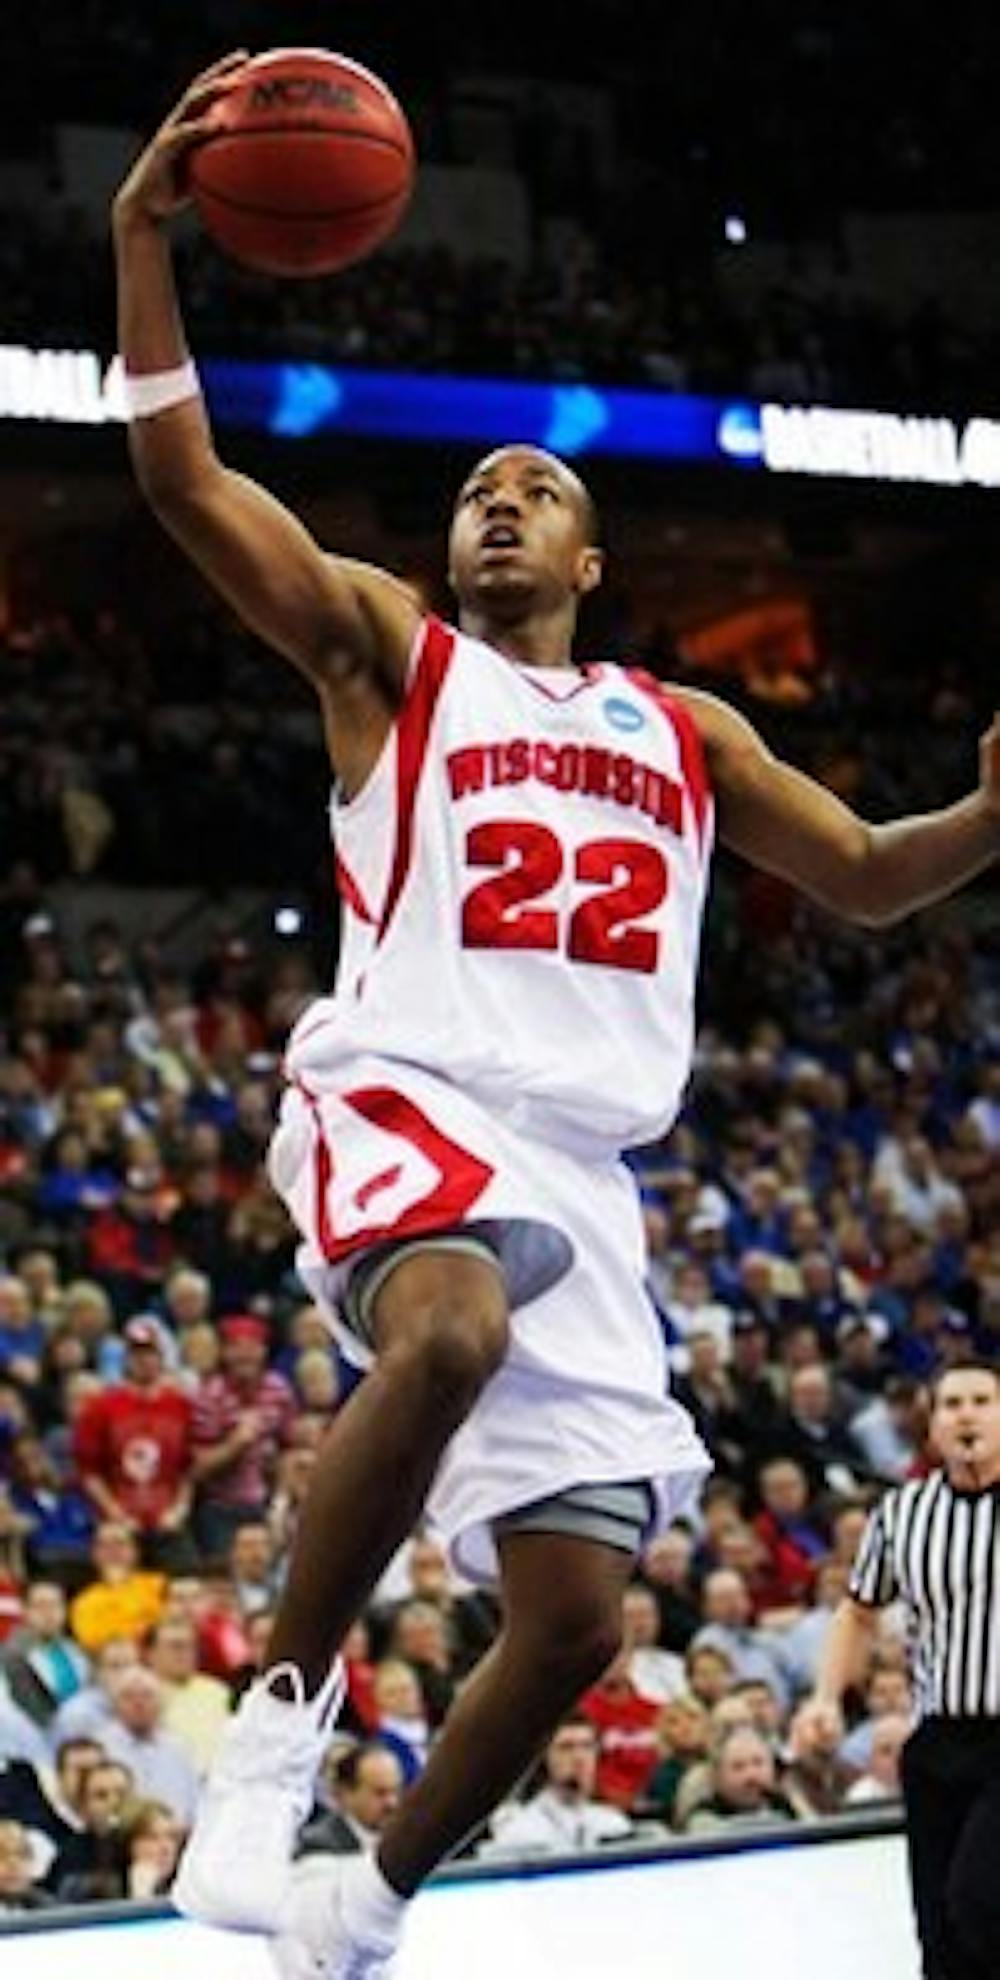 MARCHING TO MOTOWN: Beasley no match for Badgers, UW to face Davidson in Sweet 16